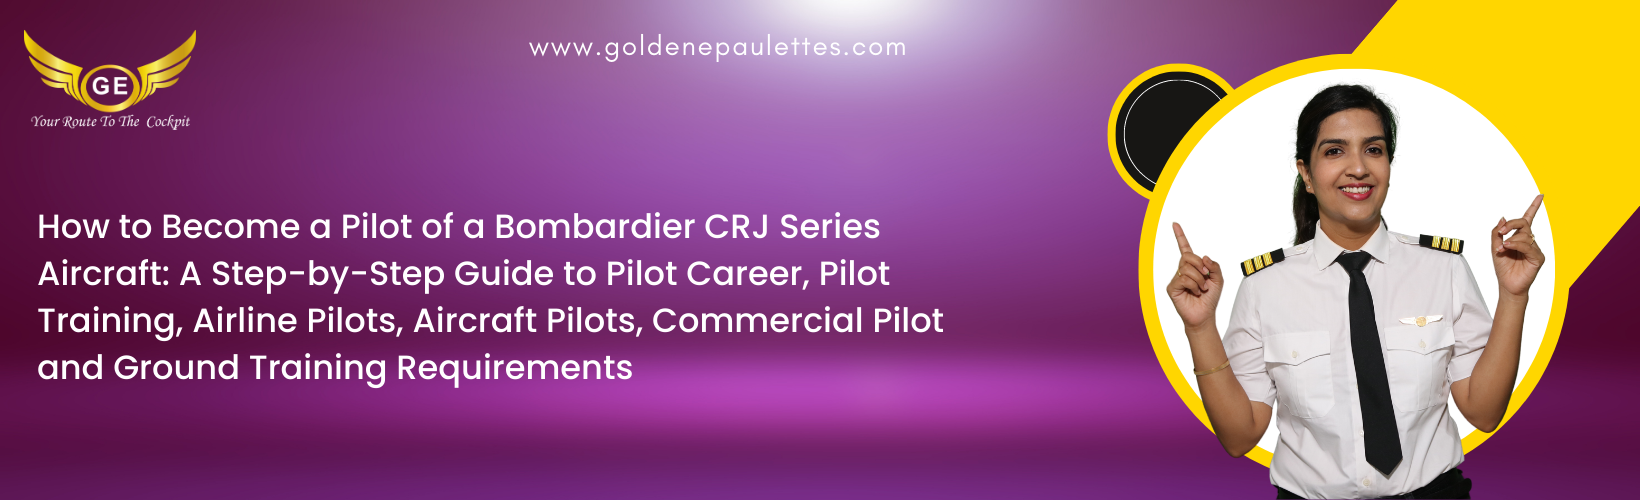 7.How to Become a Pilot of a Bombardier CRJ Series Aircraft